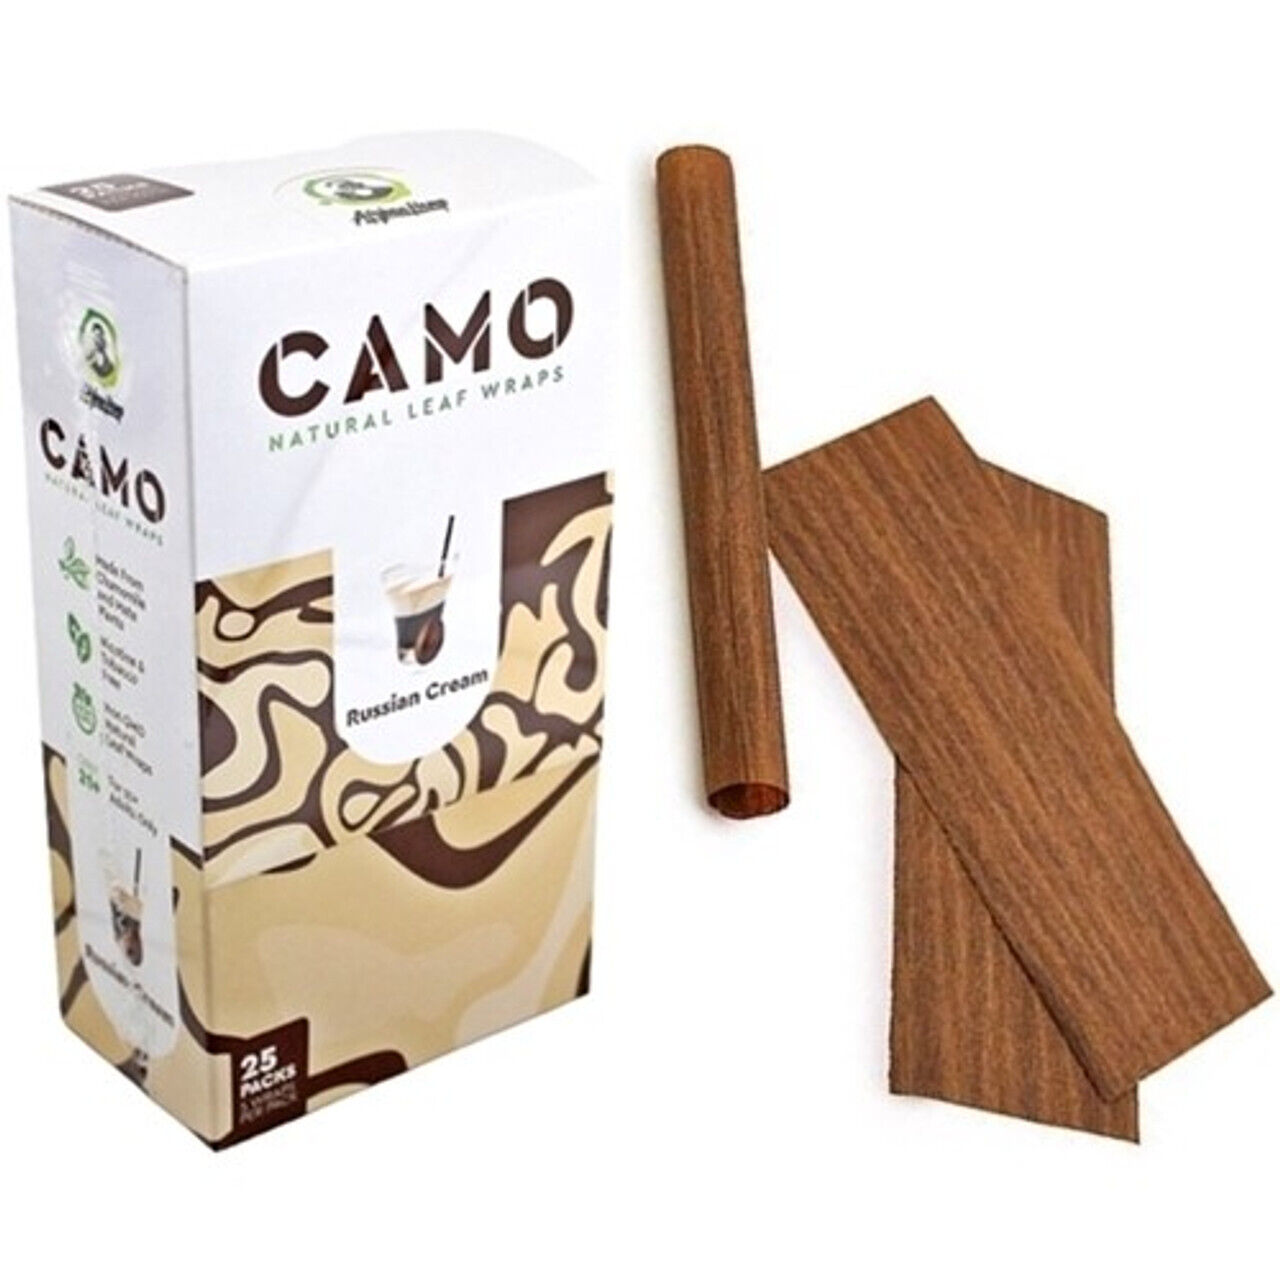 Camo Natural Leaf Wraps RUSSIAN CREAM Self Rolling Herbal Wraps (Full Box of 25)